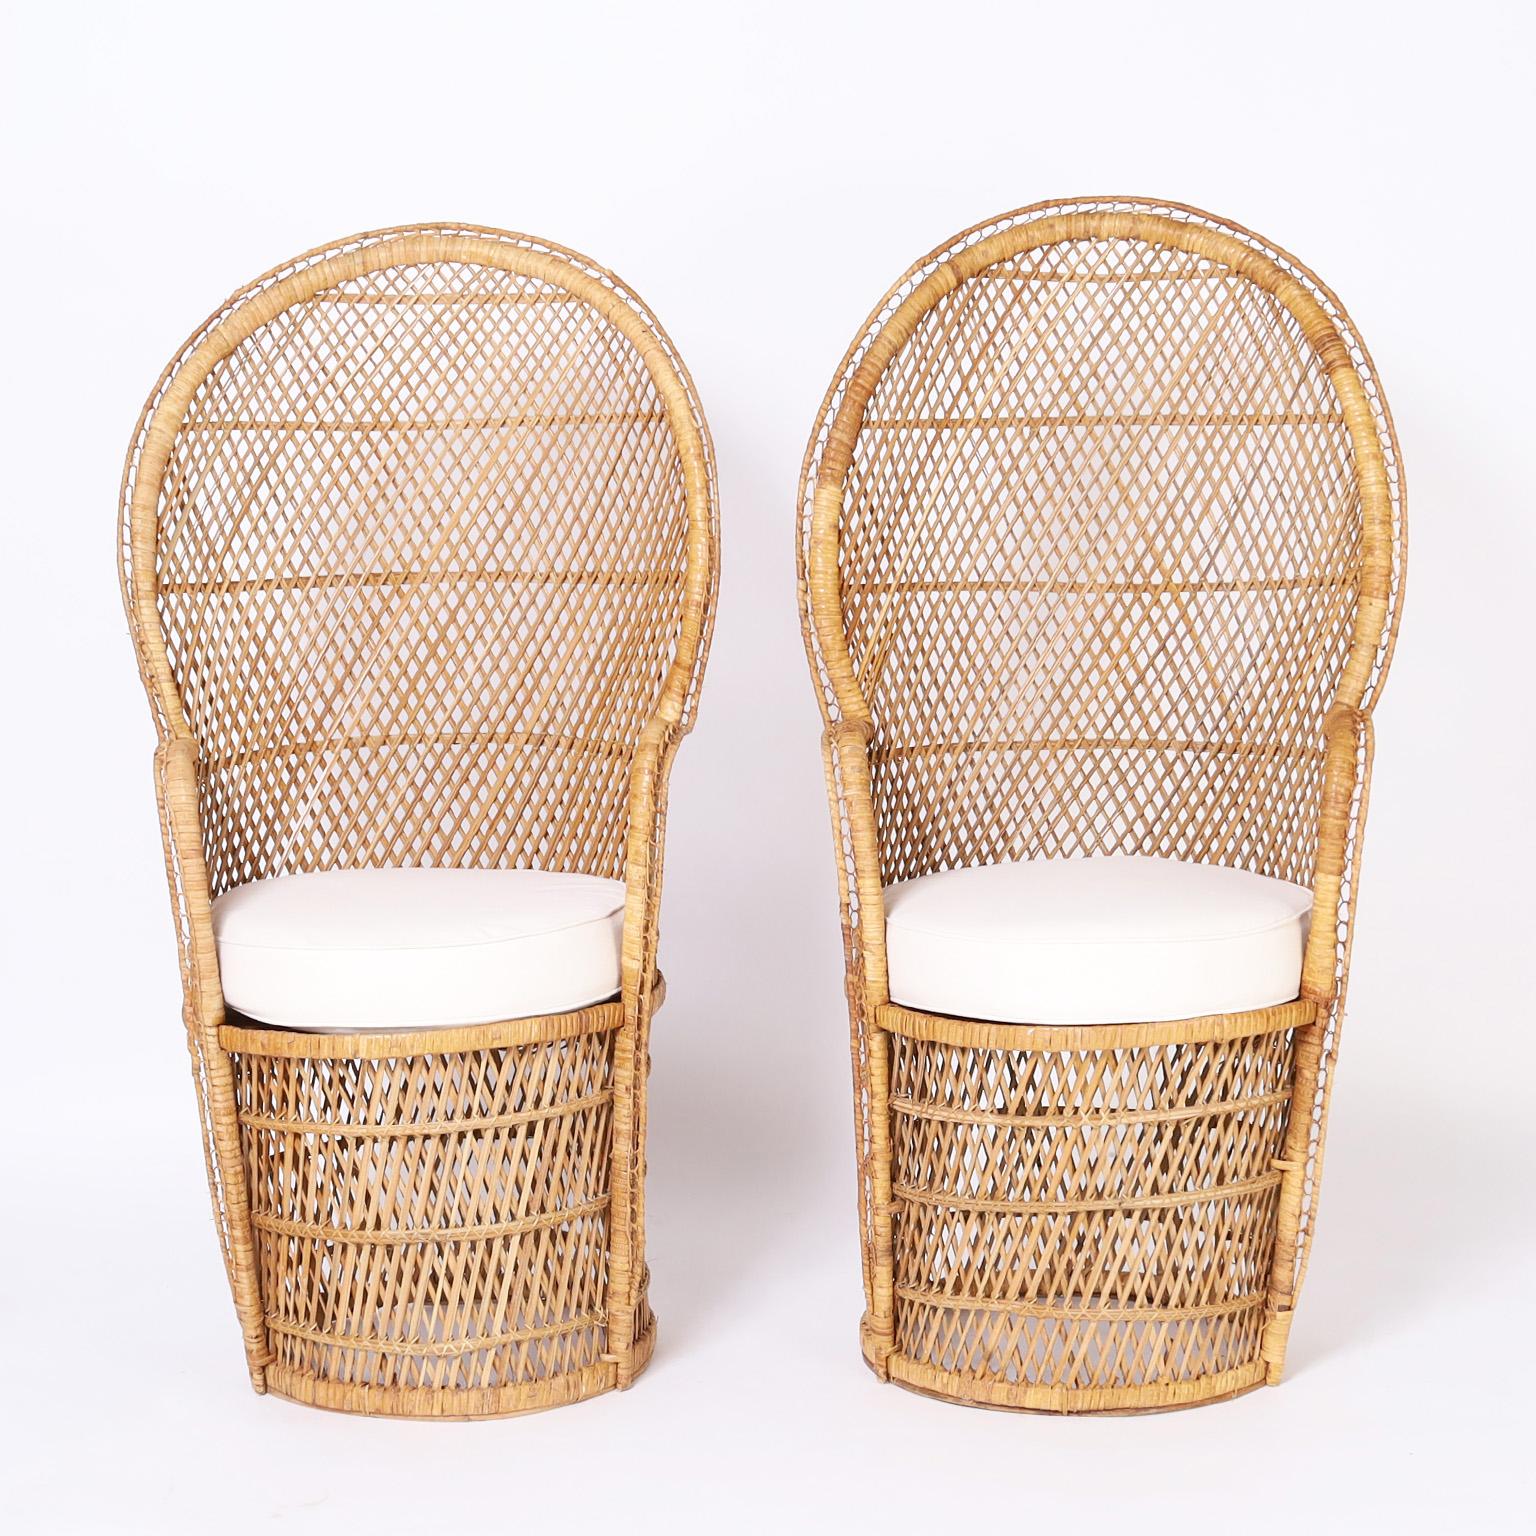 Tropical pair of vintage Anglo Indian peacock chairs crafted in wicker and rattan with an unusual smaller scale and barrel back design.